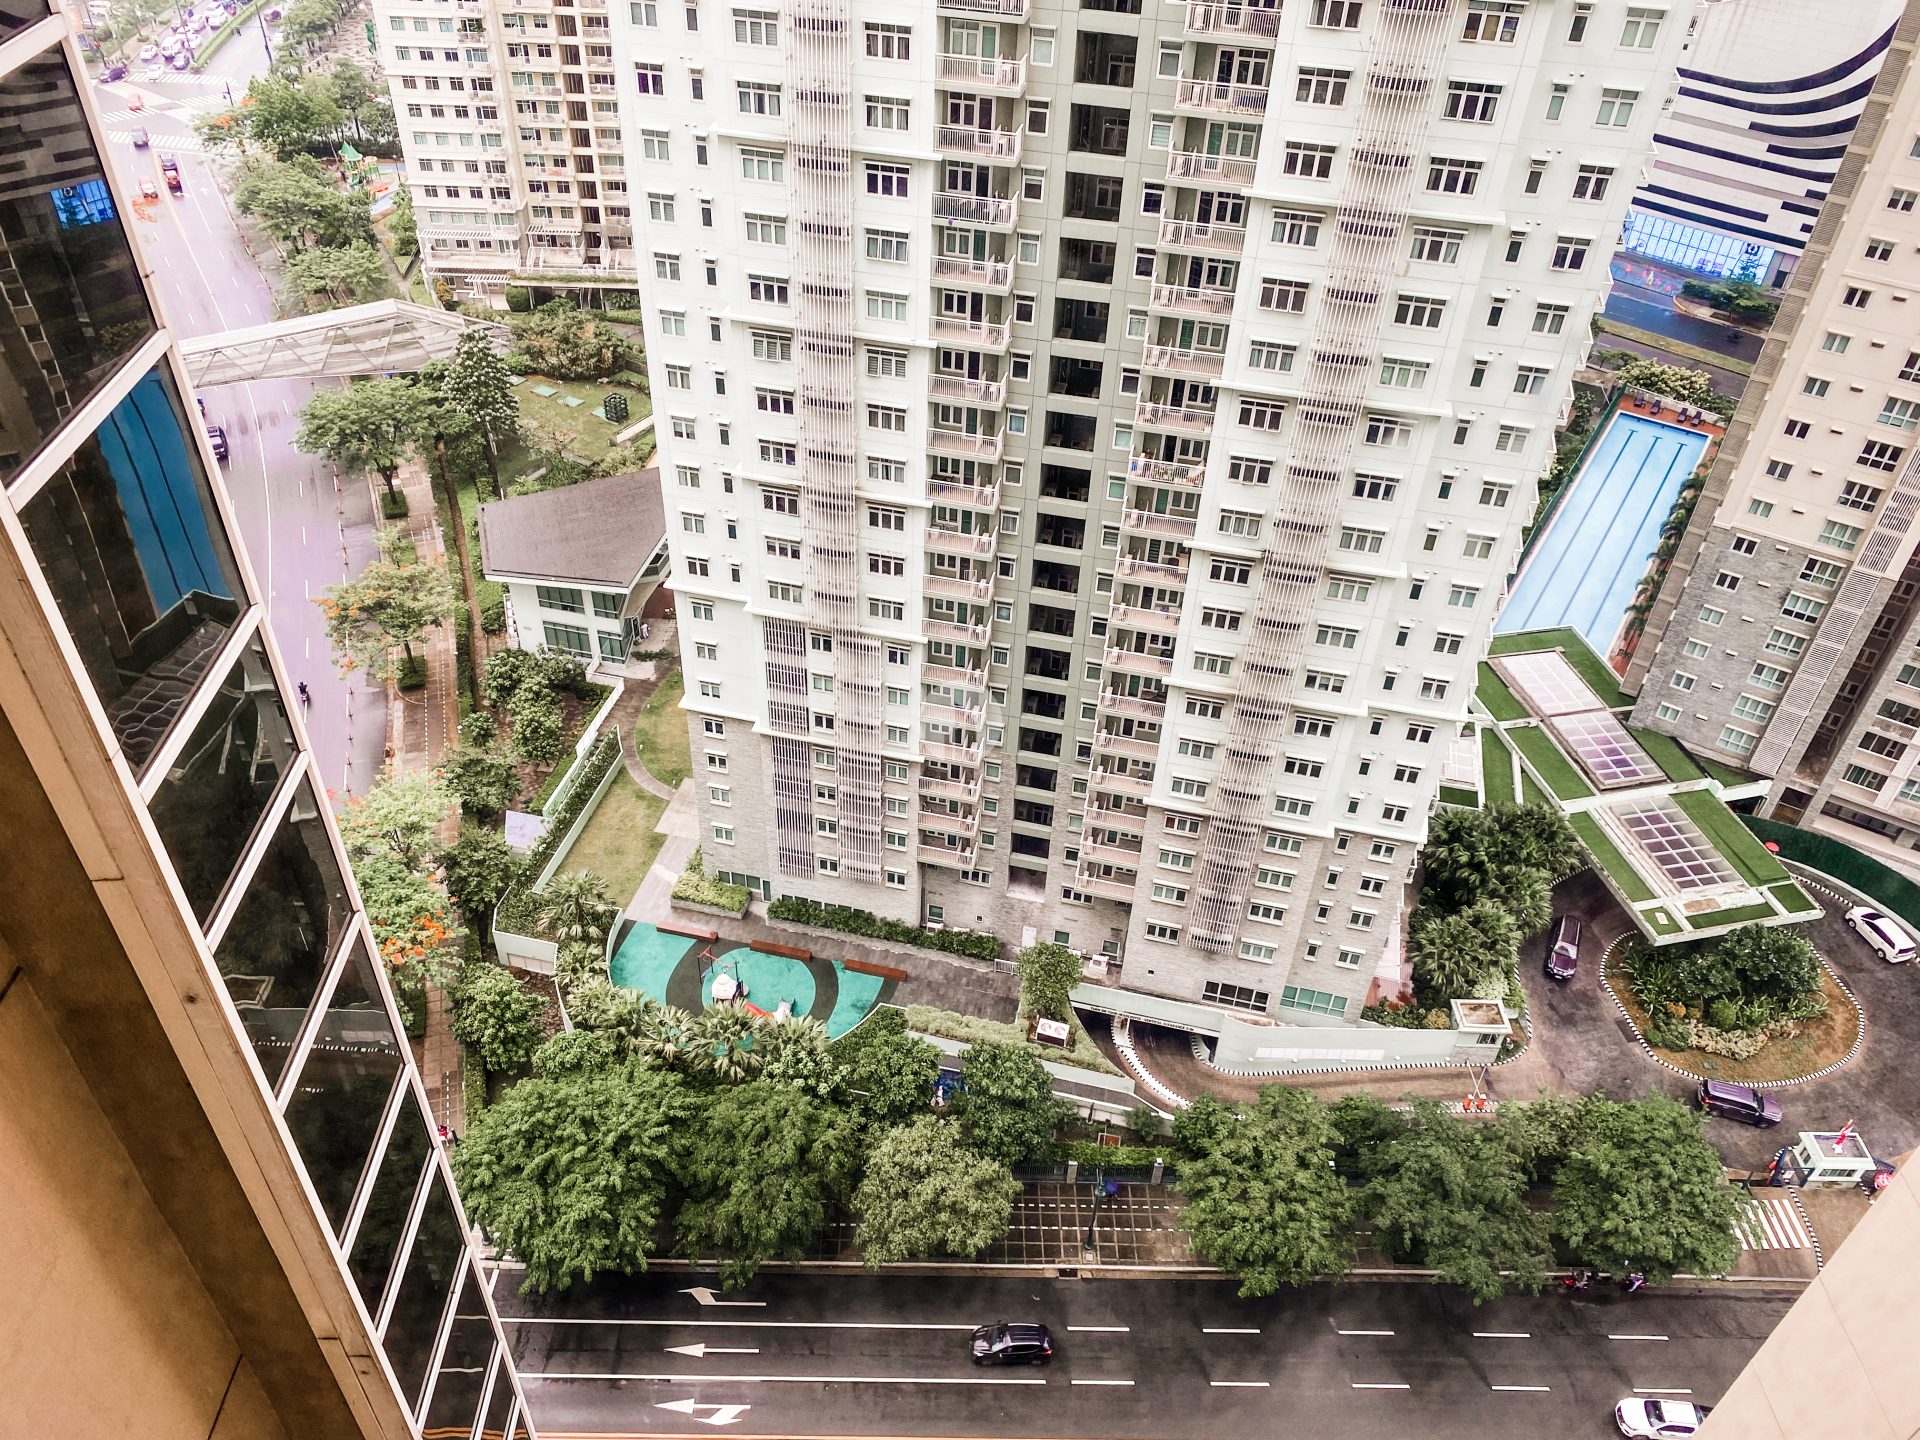 Condo Unit at South of Market in Taguig by Golden Sphere Realty